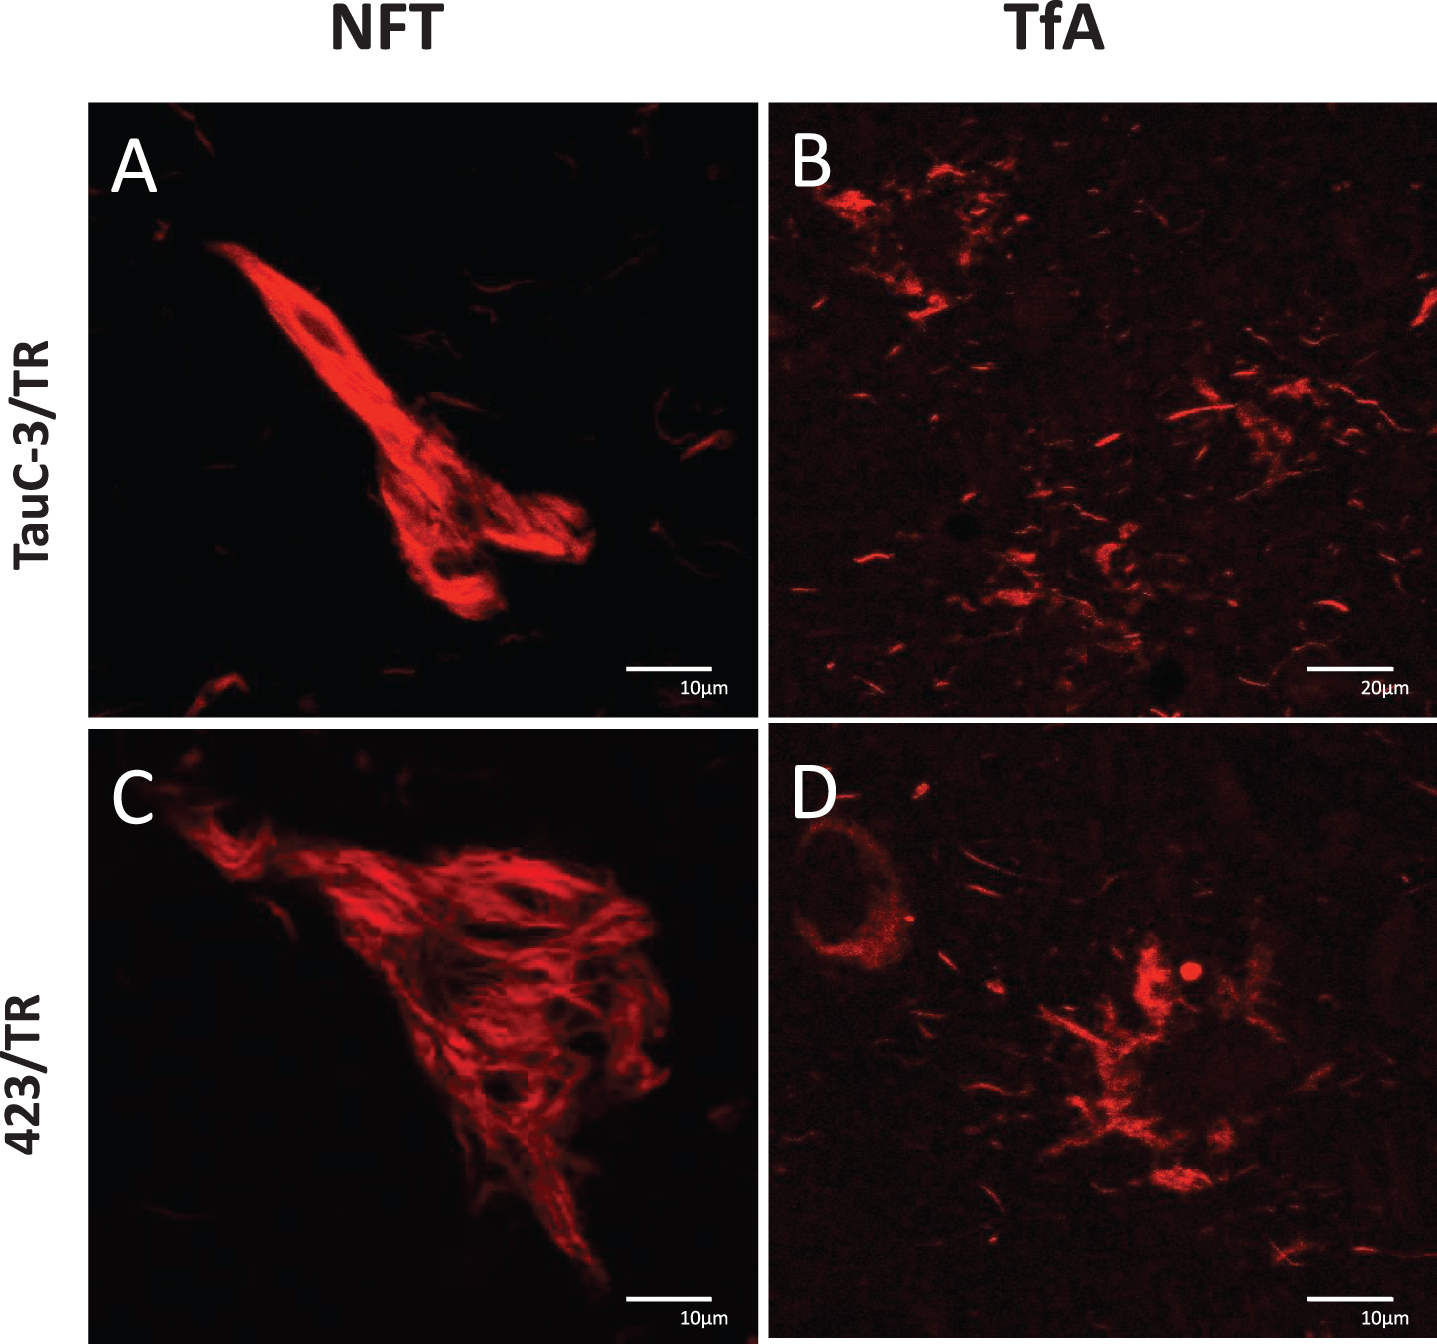 Absence of tau truncation in PSP: A, B) TauC-3 and C, D) 423. Lesions labeled by TR: A) iNFT, C) eNFT, and in B, D) tufted astrocytes. Scale bars, 10 μm, except for (B), 20 μm.